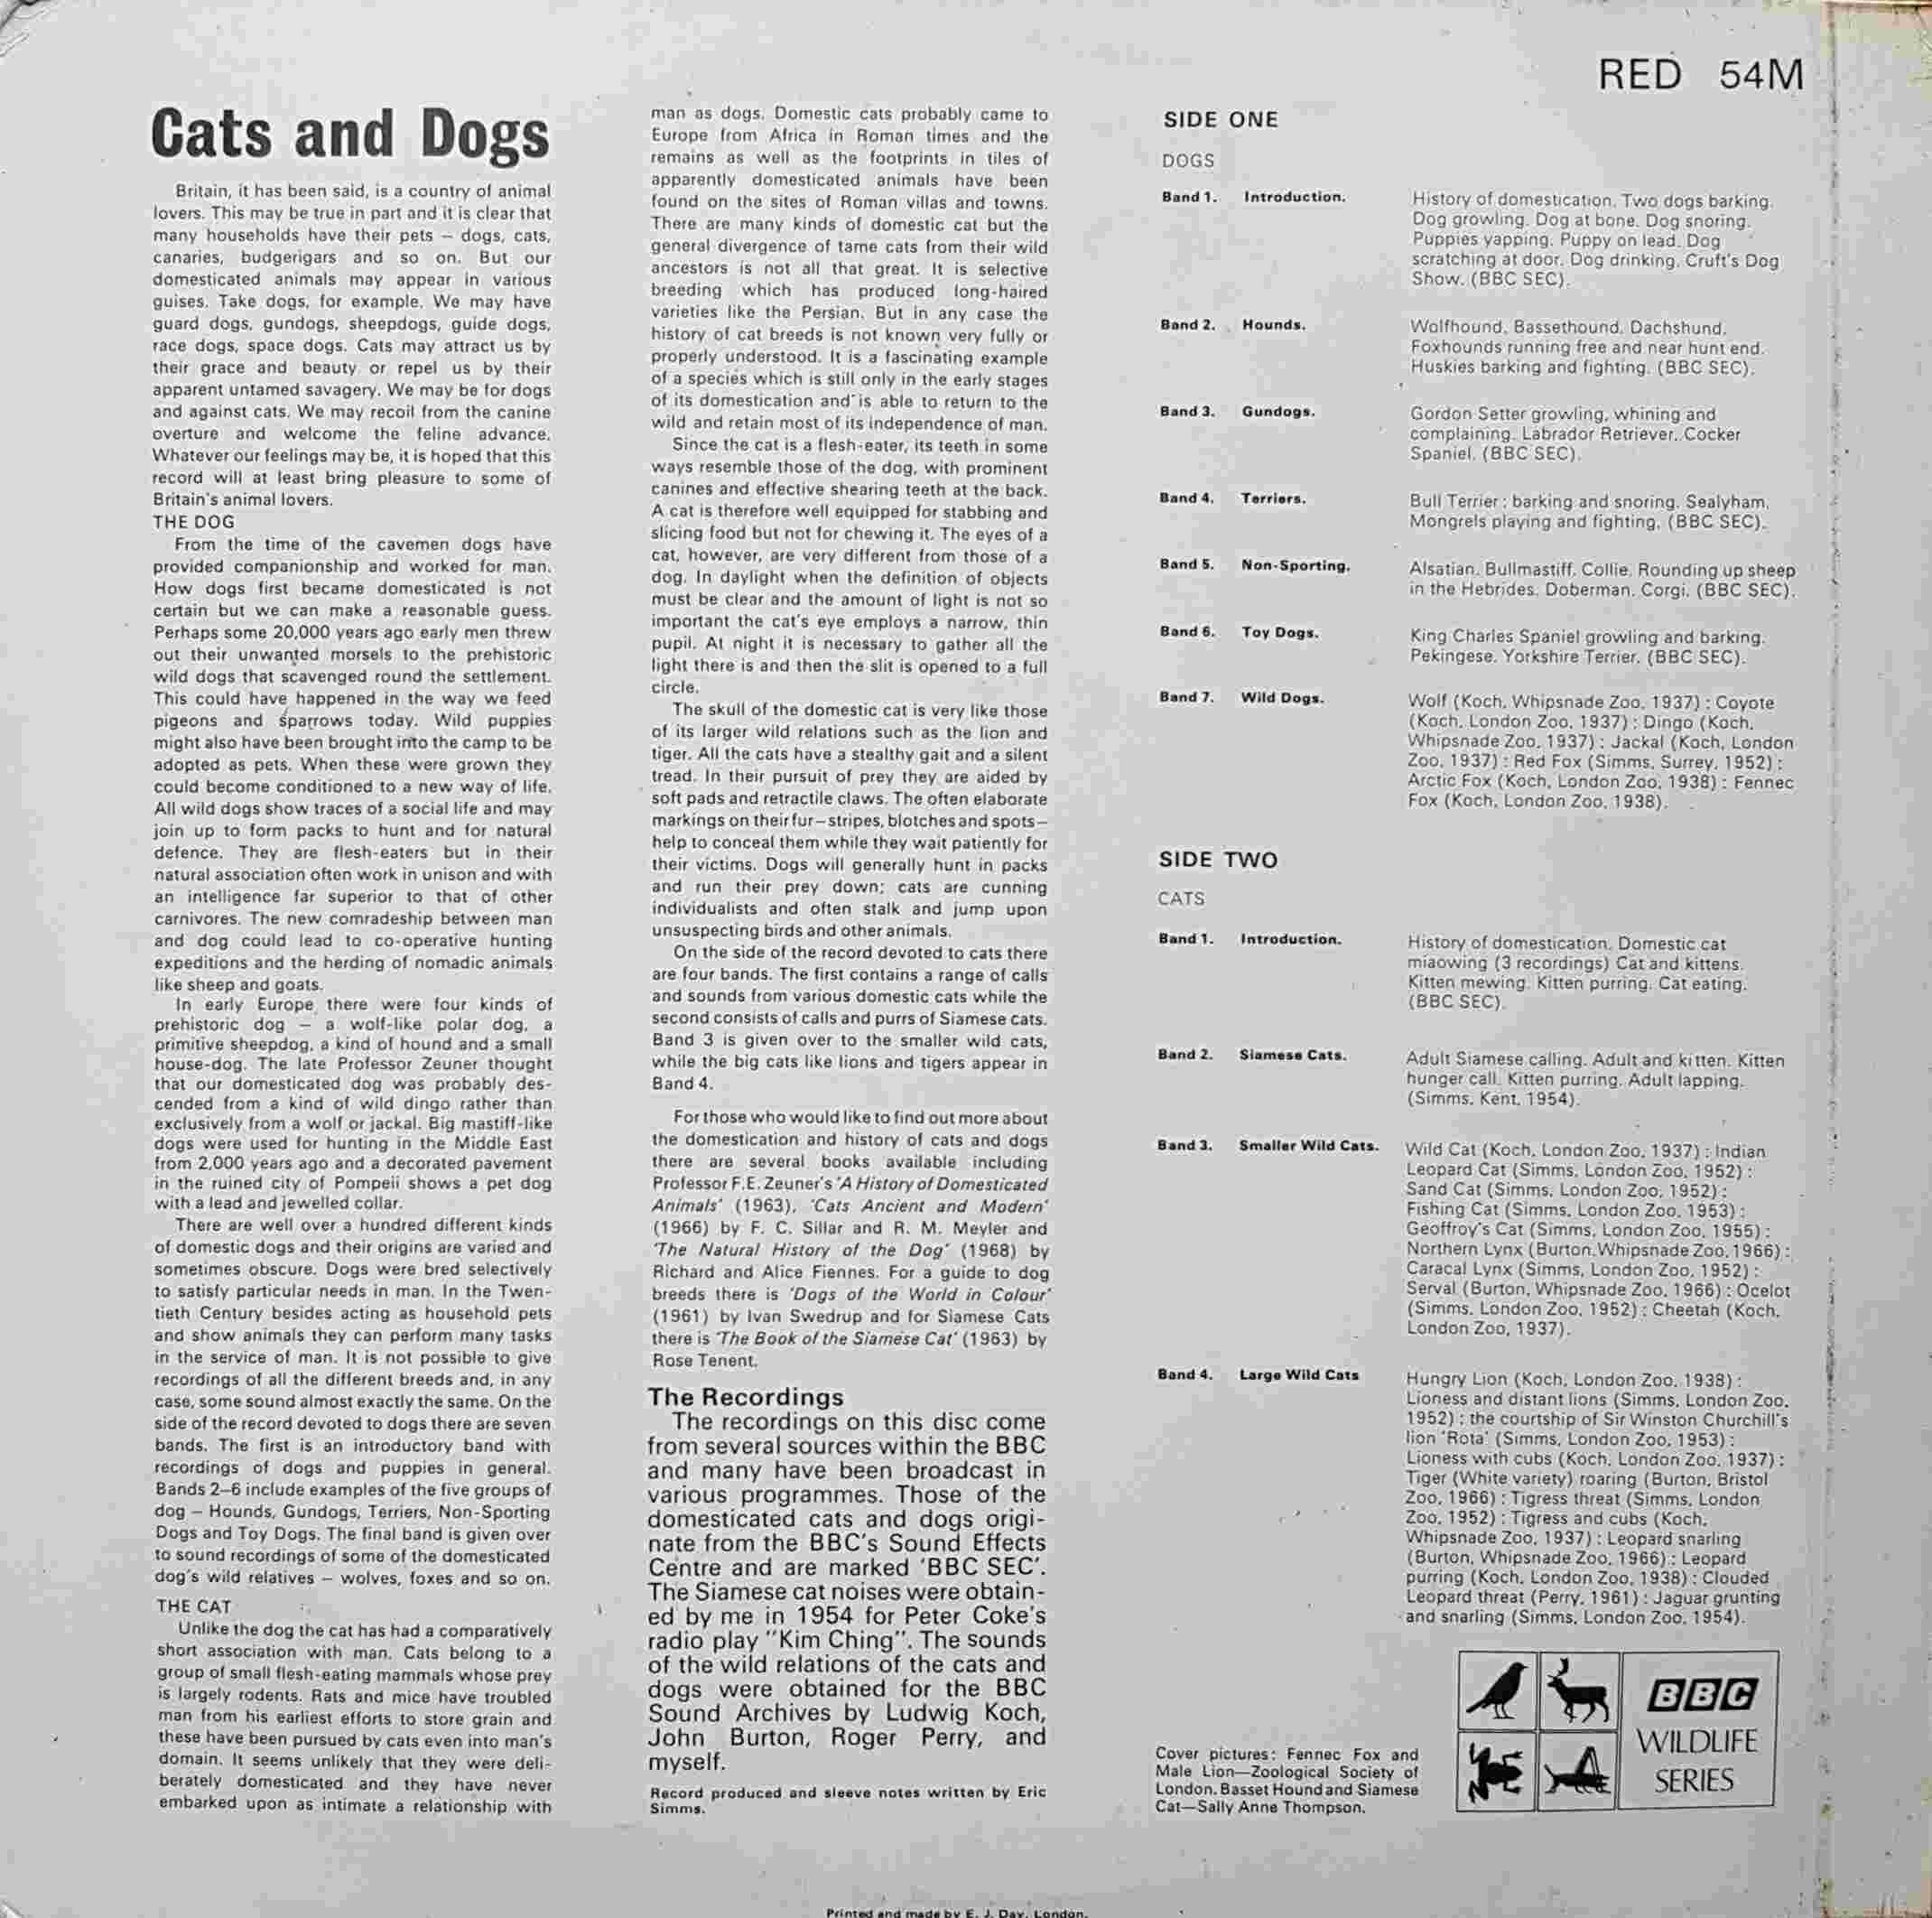 Picture of RED 54 Cats and dogs by artist Various from the BBC records and Tapes library